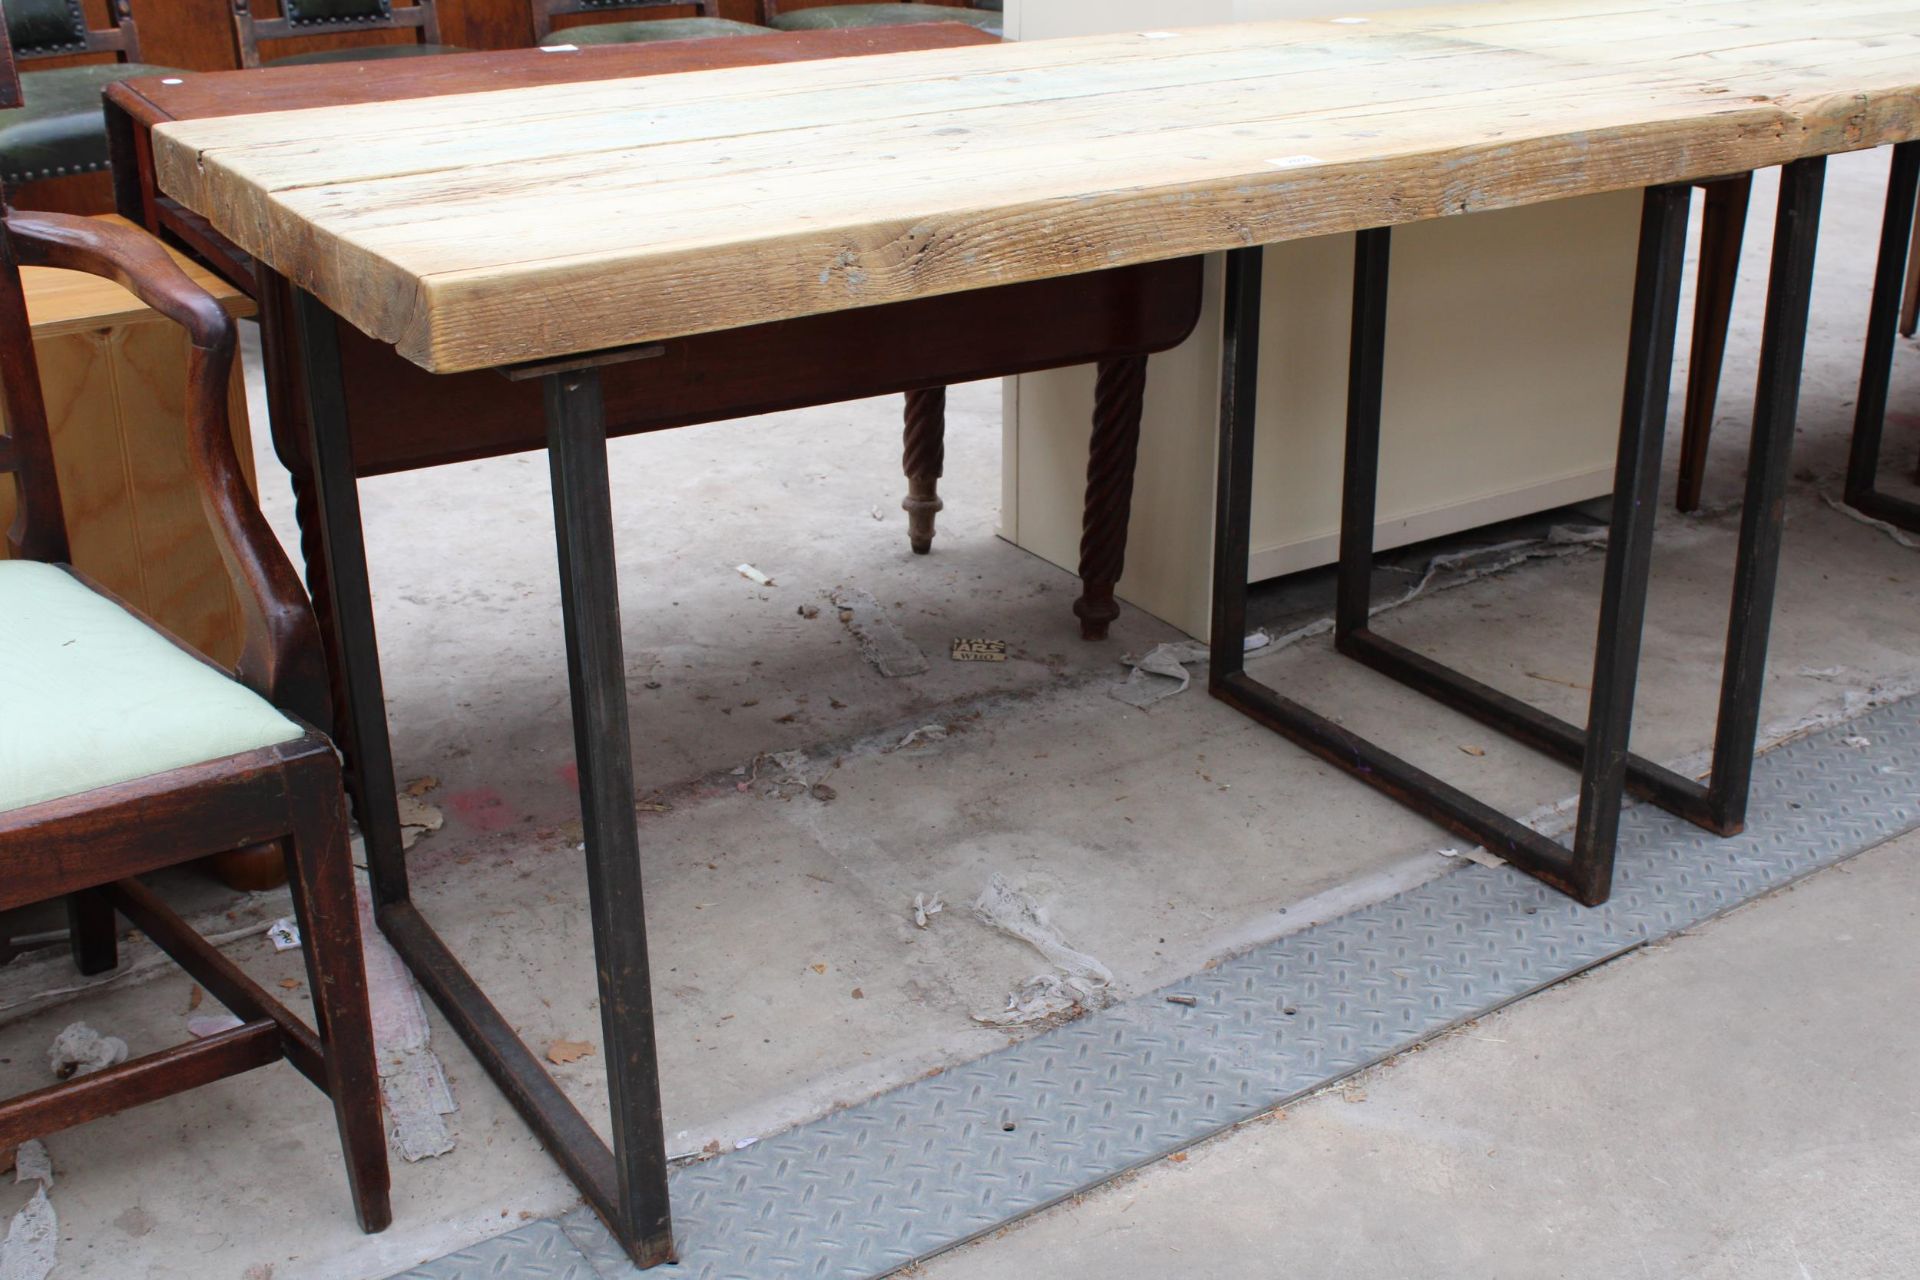 A RUSTIC FOUR PLANK TABLE, 47" X 27" ON METAL LEGS - Image 2 of 2